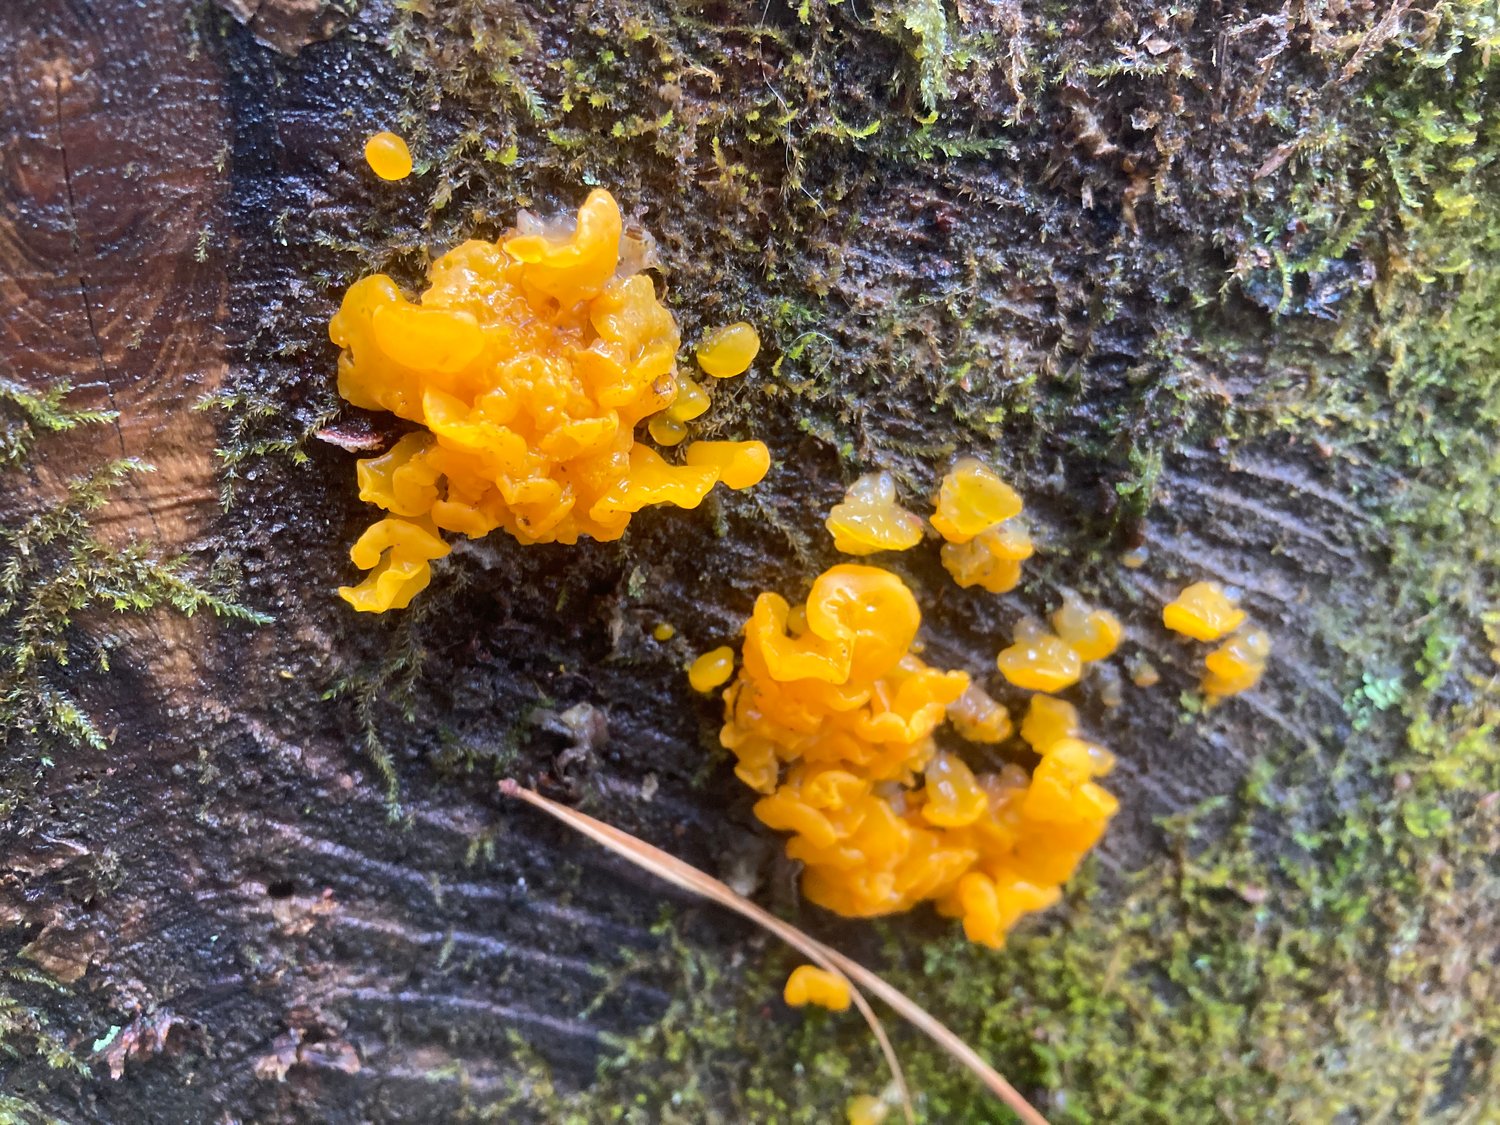 The luminous glow of this mushroom, dubbed “orange jelly,” is easy to spot against the dark wood of a rotting stump. Jelly fungi are characterized by their squishy gelatin-like appearance.